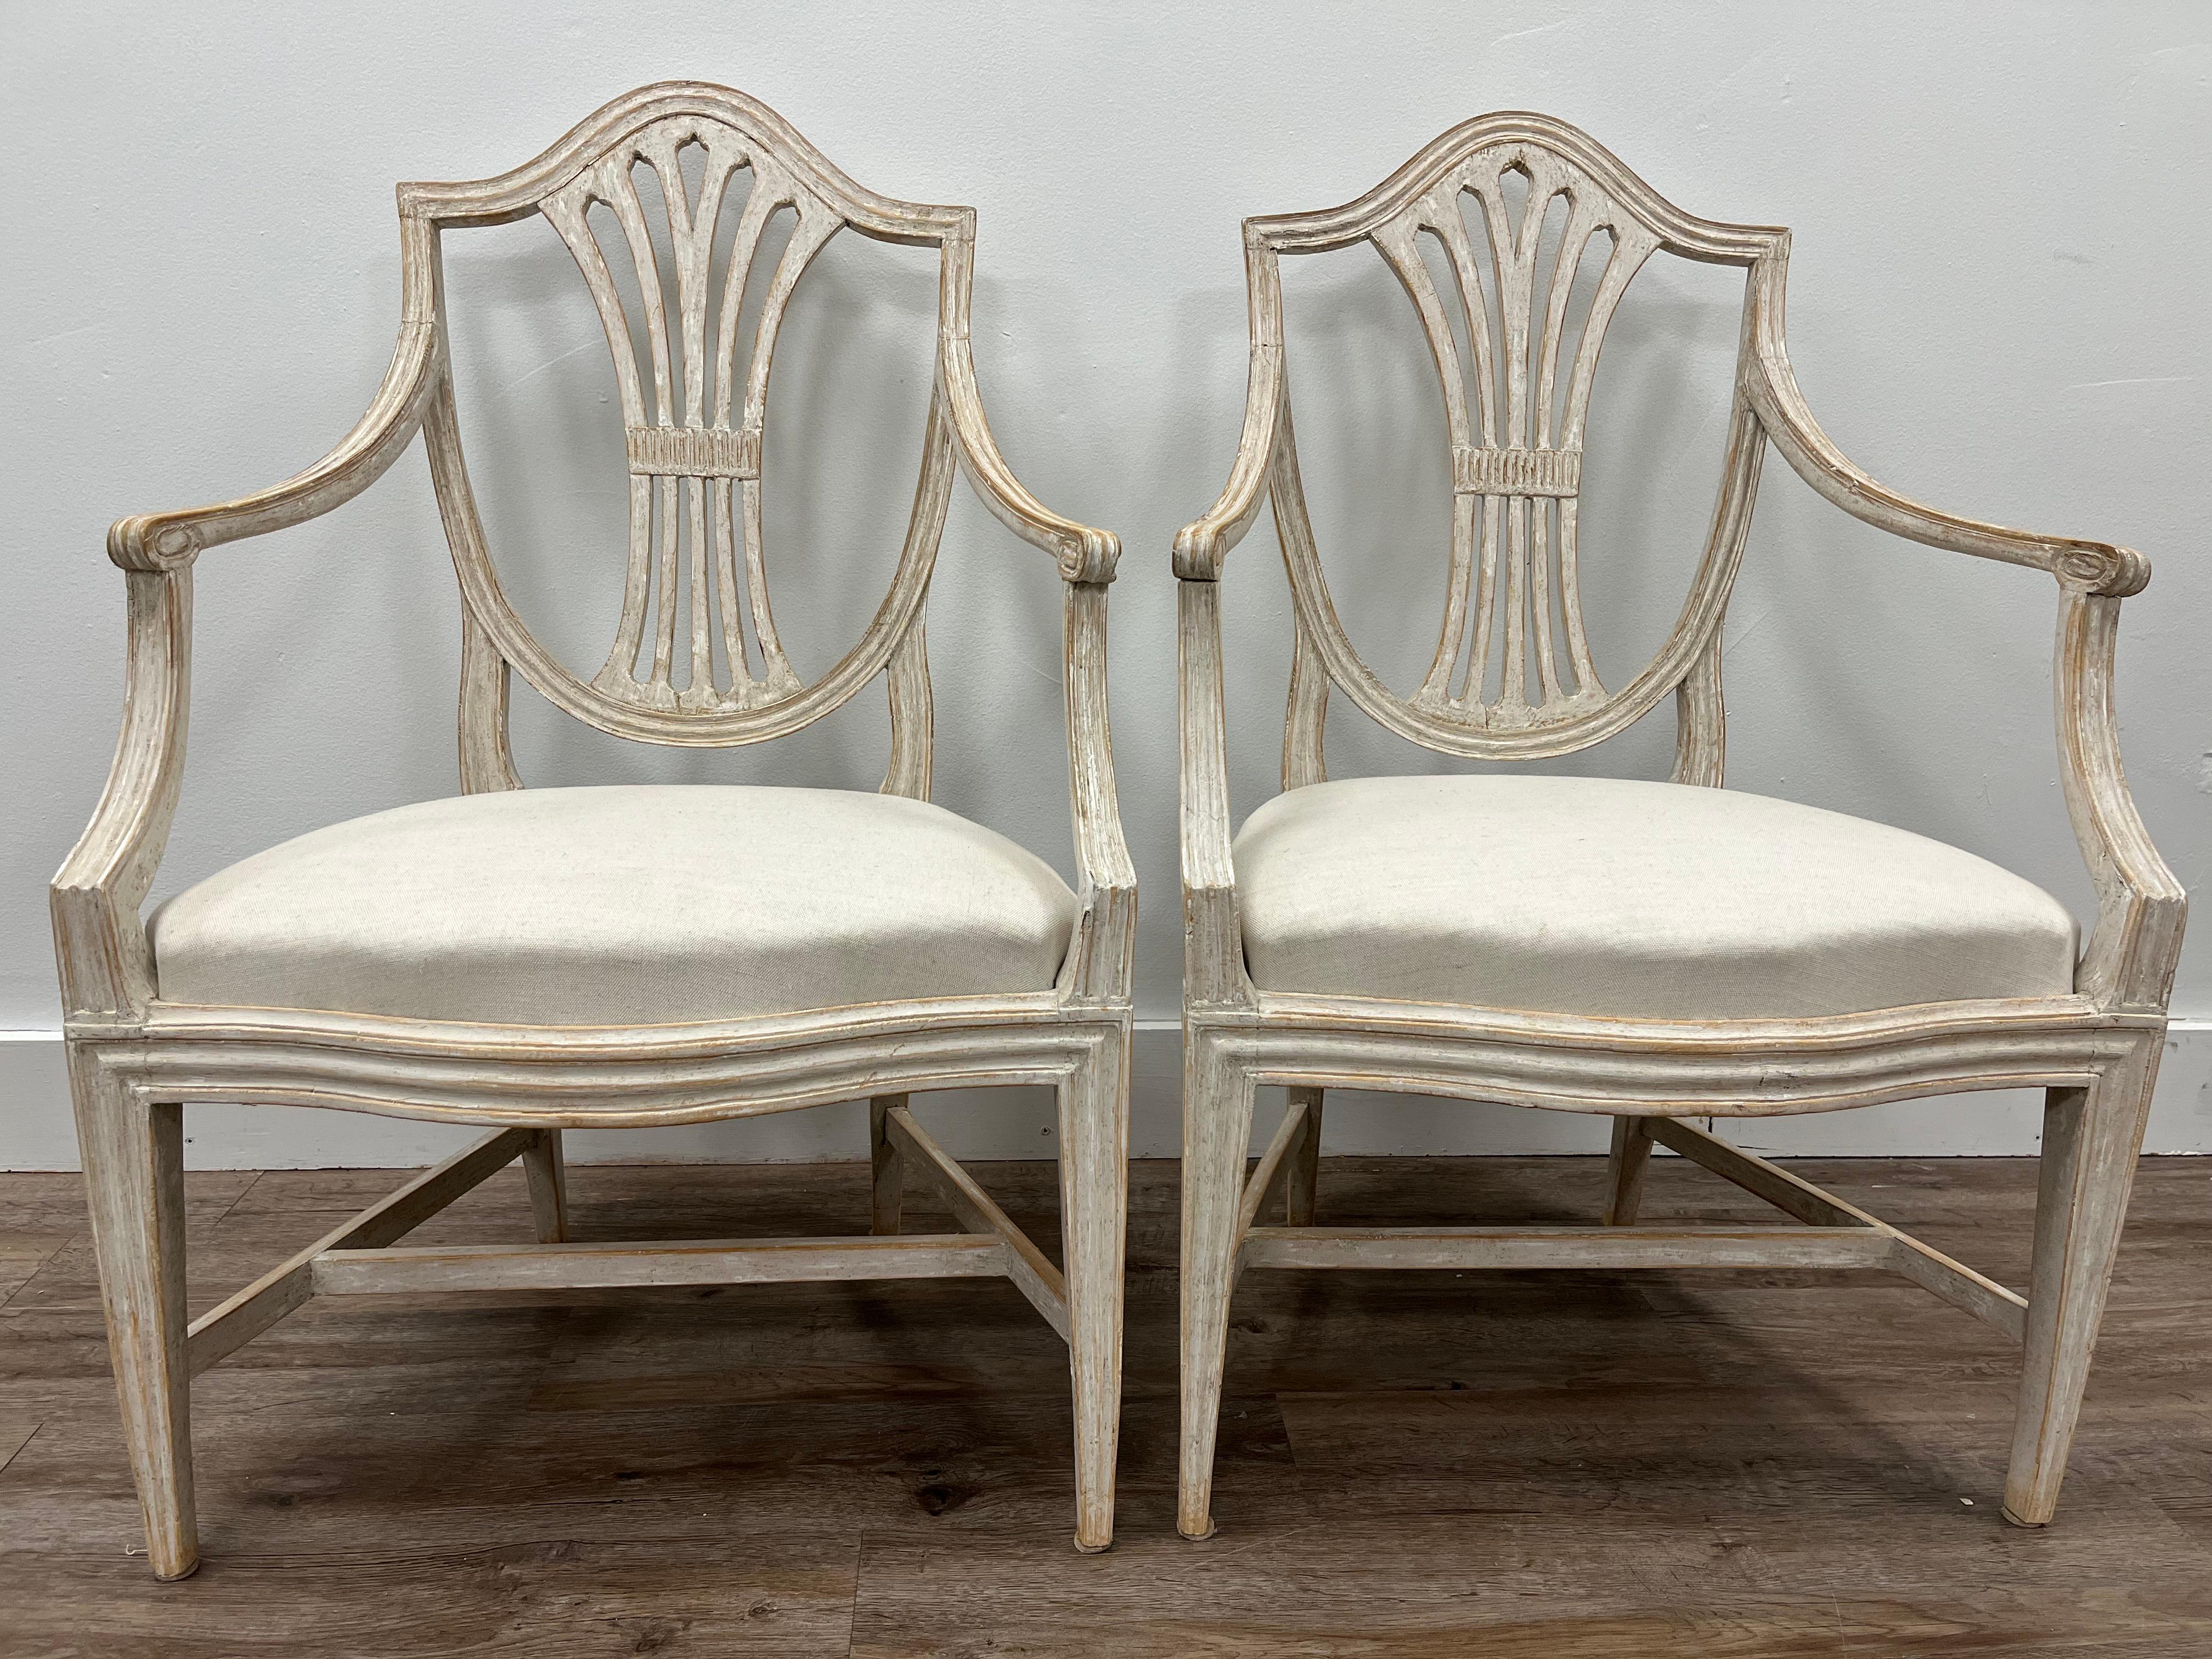 A stunning pair of Gustavian armchairs made in Stockholm and signed by Johan Erik Höglander (1758-1813). Arched shield back style with bow front seats. Frame - back, arms and base with detailed contours. One chair still retains its original